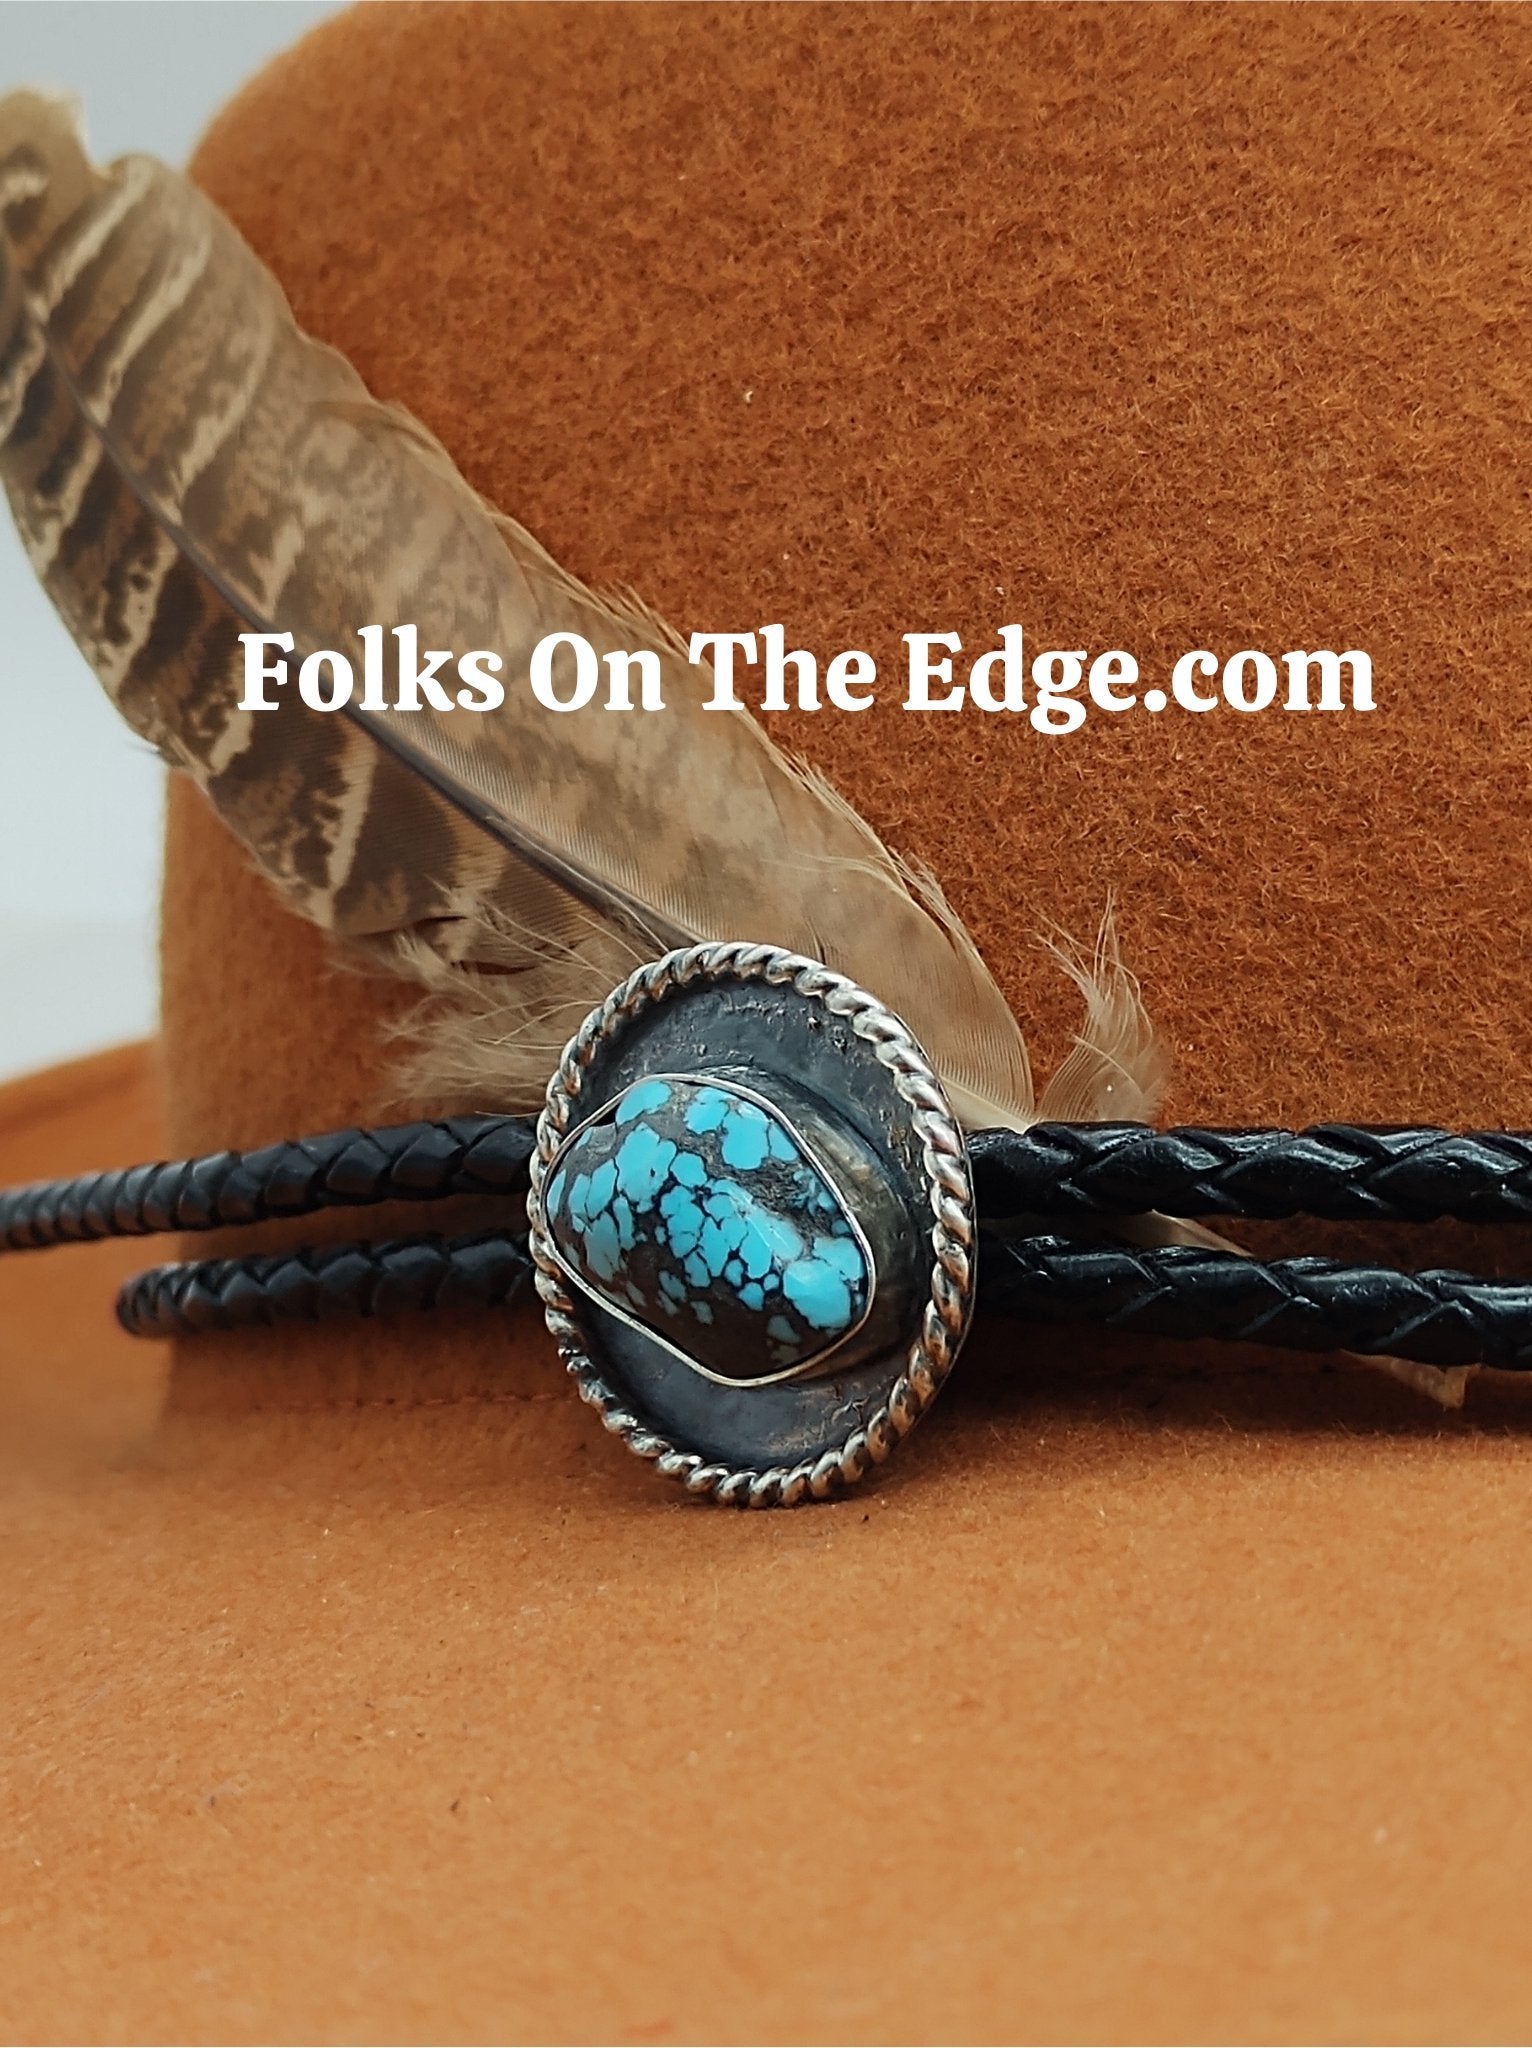 Blue Eyes Designs Handmade Western Cowboy Hat Band with Turquoise and Silver Beads and Metal Feather